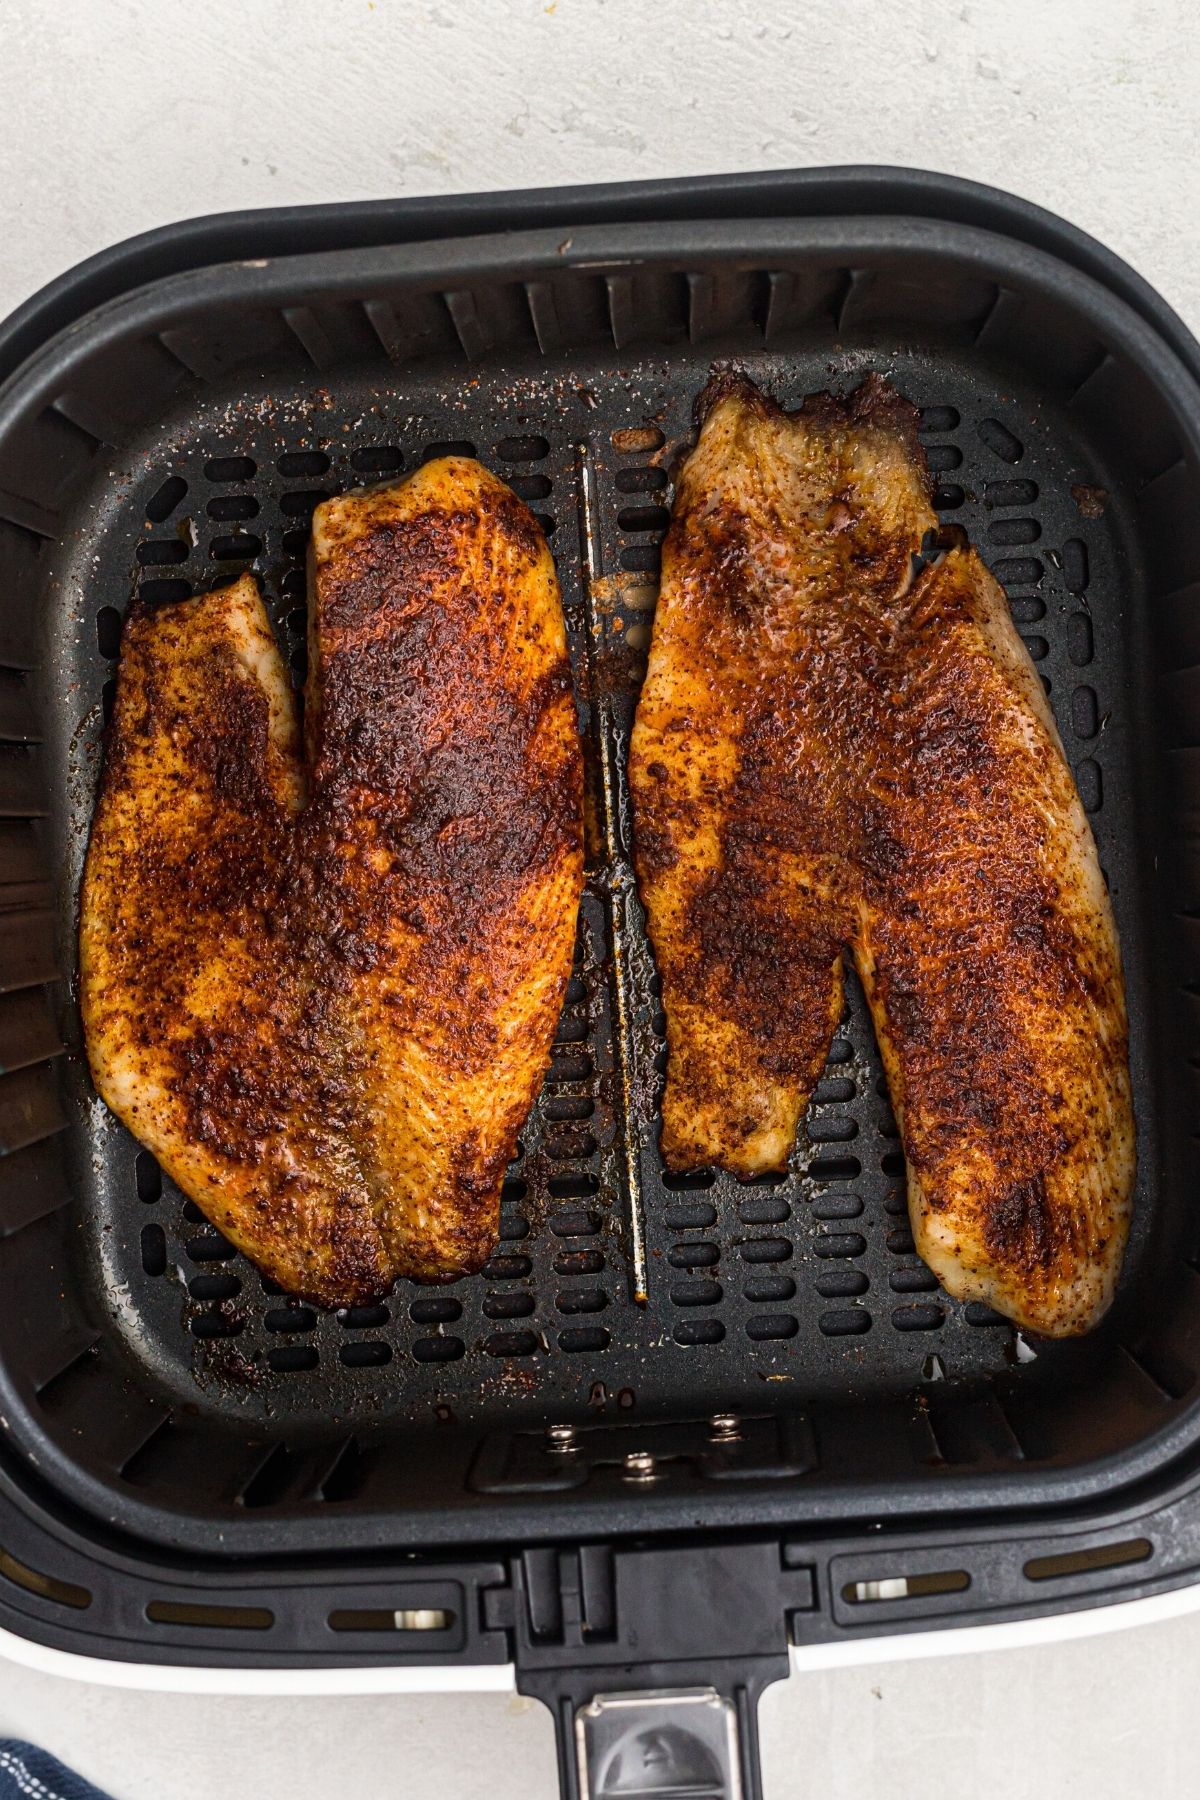 Golden brown cooked tilapia filets in the air fryer basket